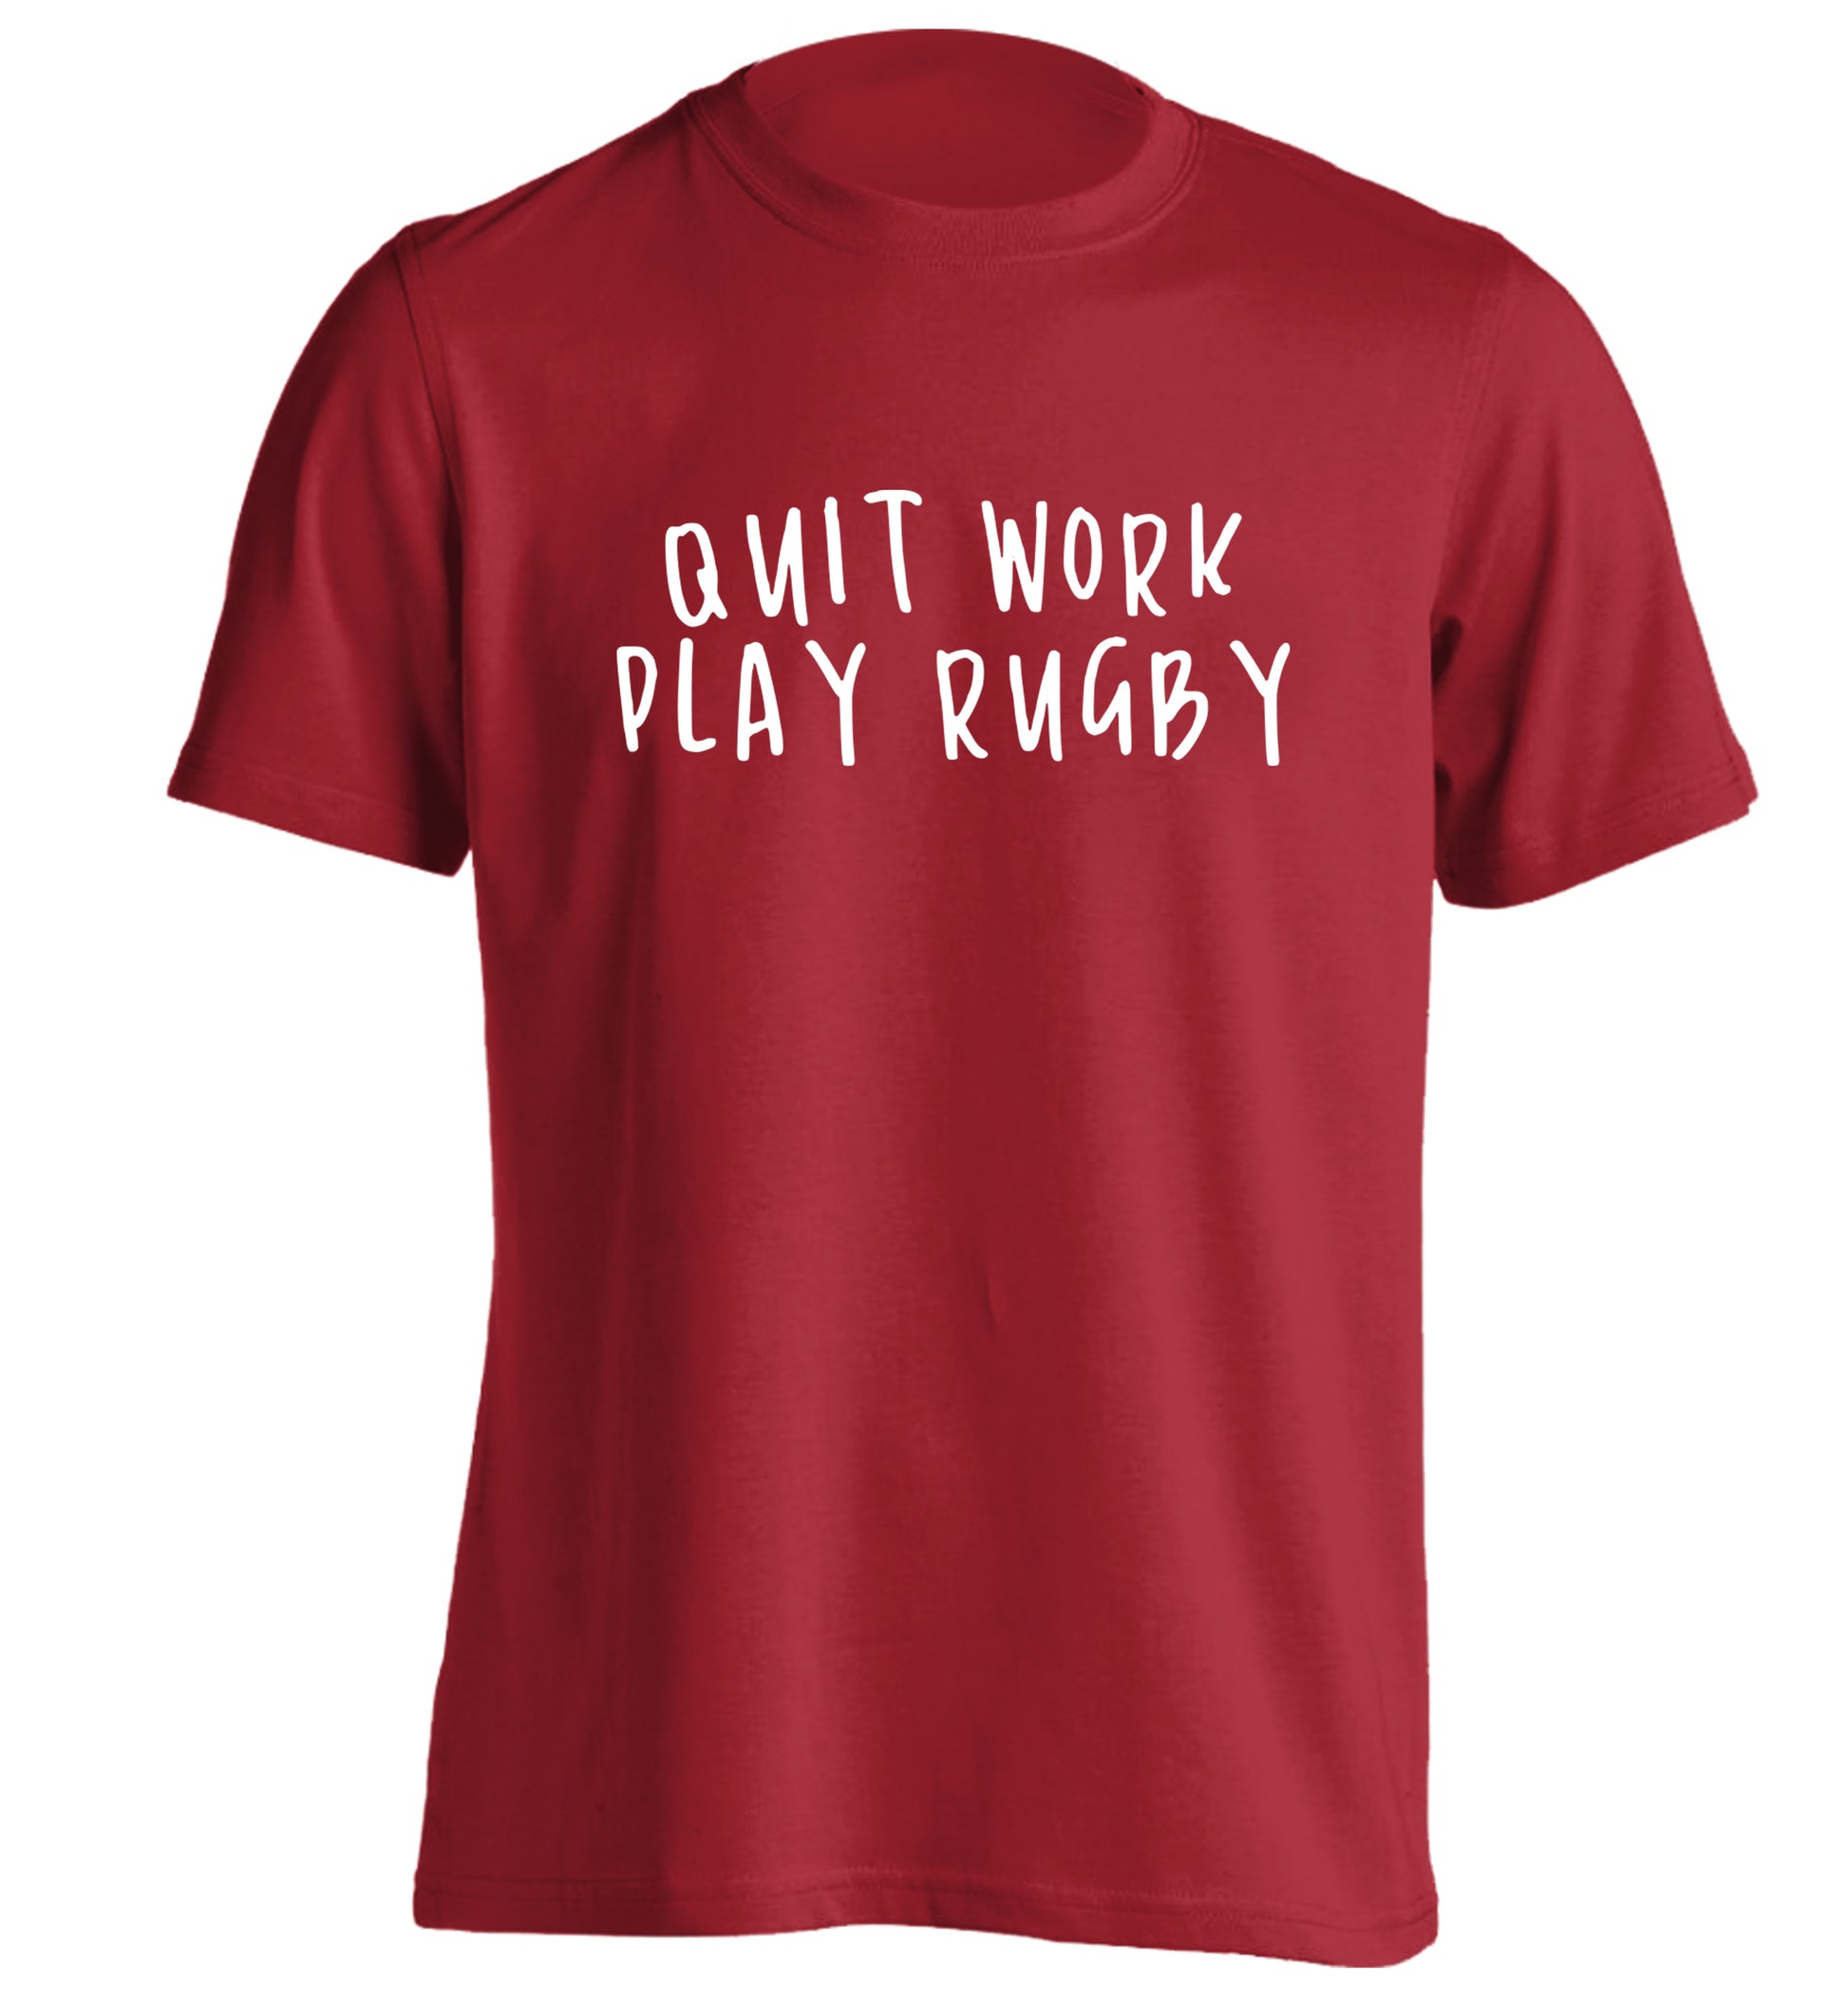 Quit work play rugby adults unisex red Tshirt 2XL